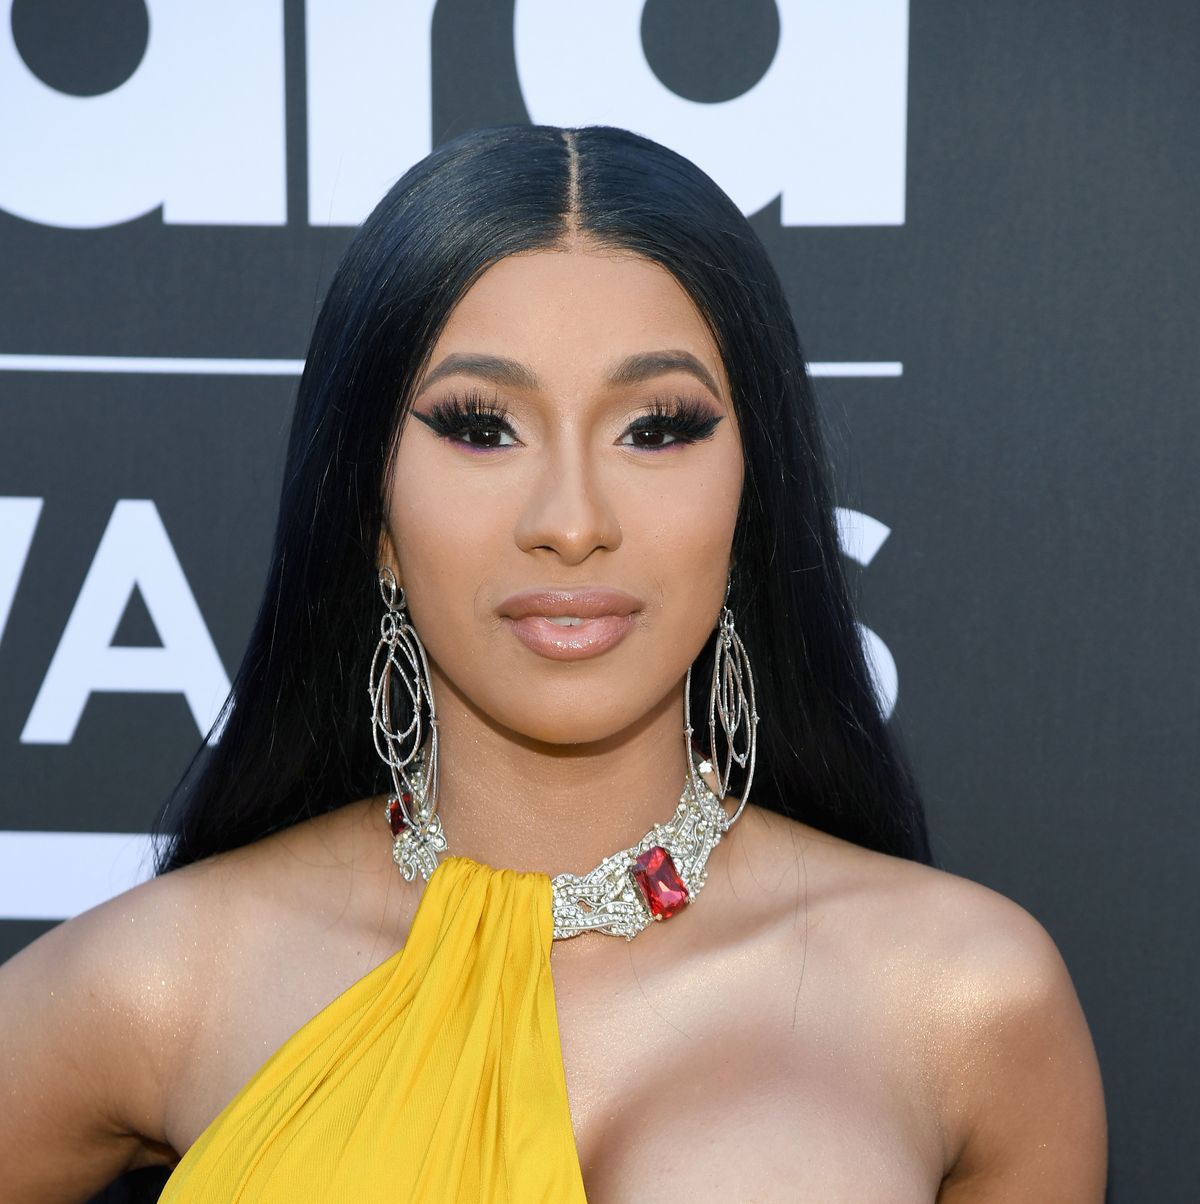 Cardi B fans get first look at the rapper's new red hairstyle